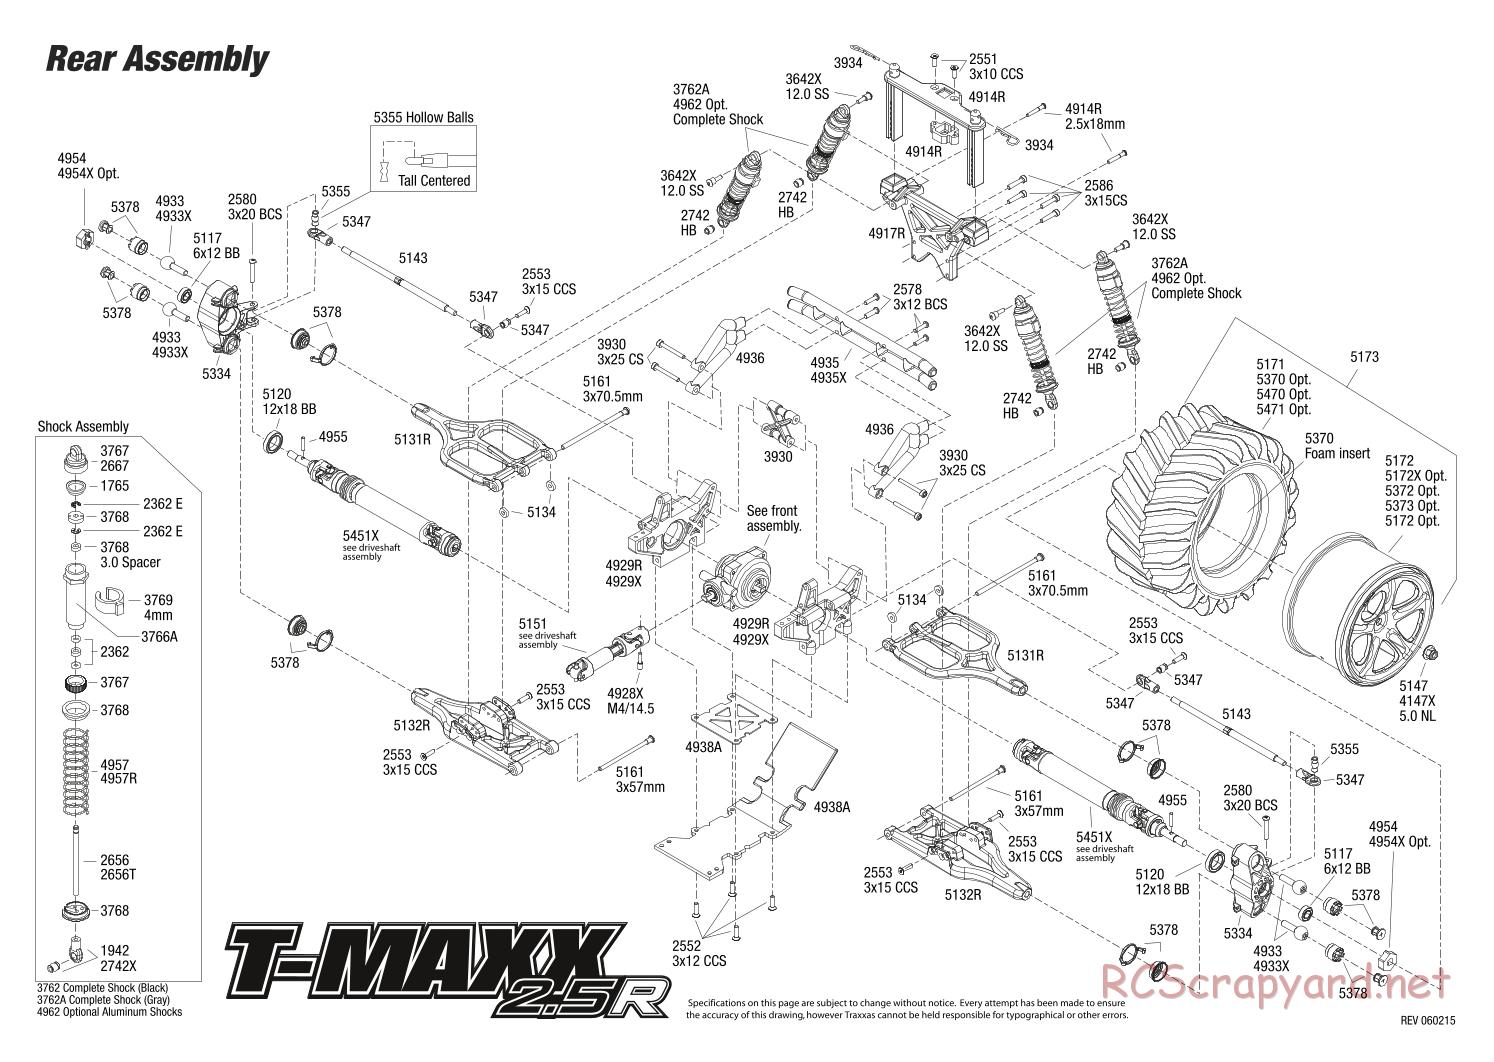 Traxxas - T-Maxx 2.5R (2006) - Exploded Views - Page 5